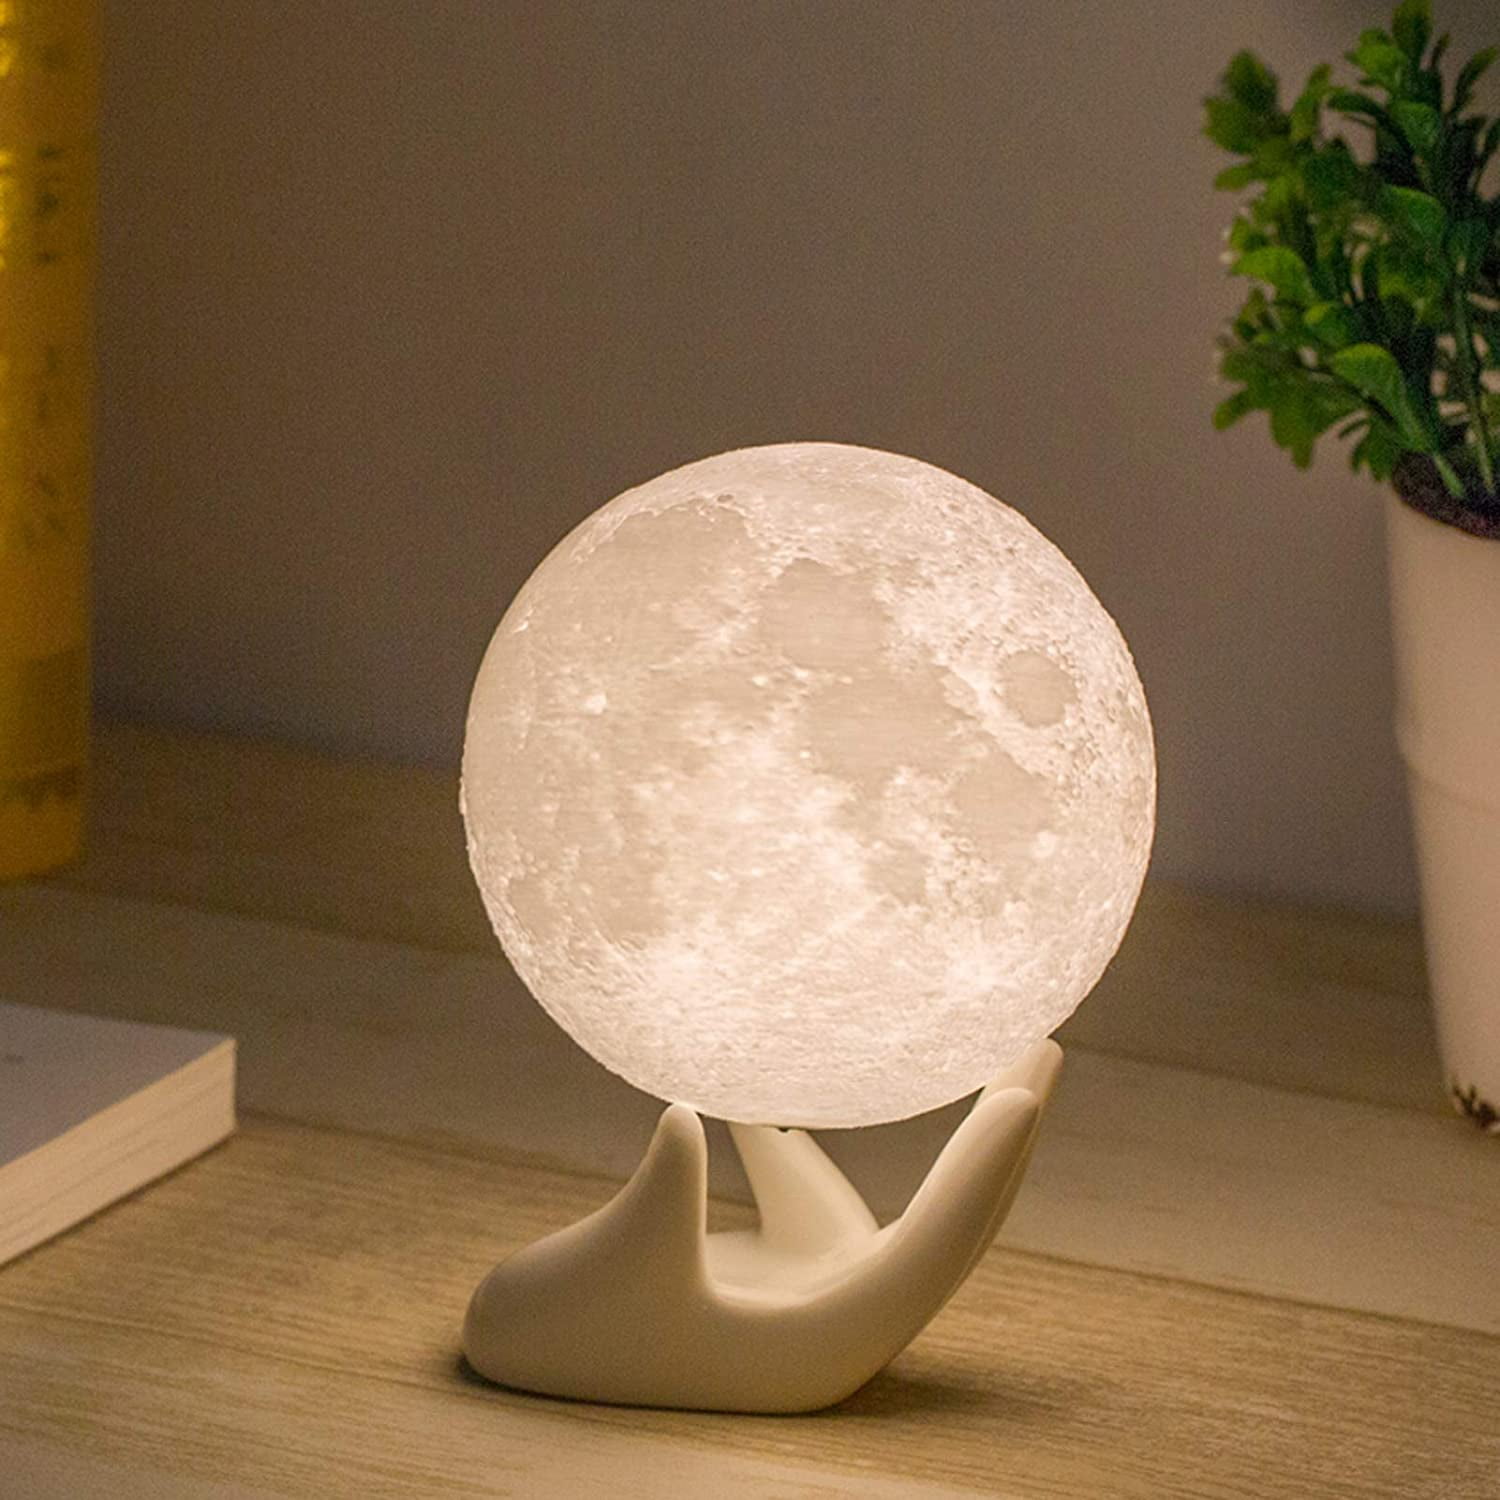 BRIGHTWORLD Moon Lamp Moon Night Light 3D Printed 4.7IN Lunar Lamp for Kids Gift for Women USB Rechargeable Touch Contral Brightness Warm and Cool White